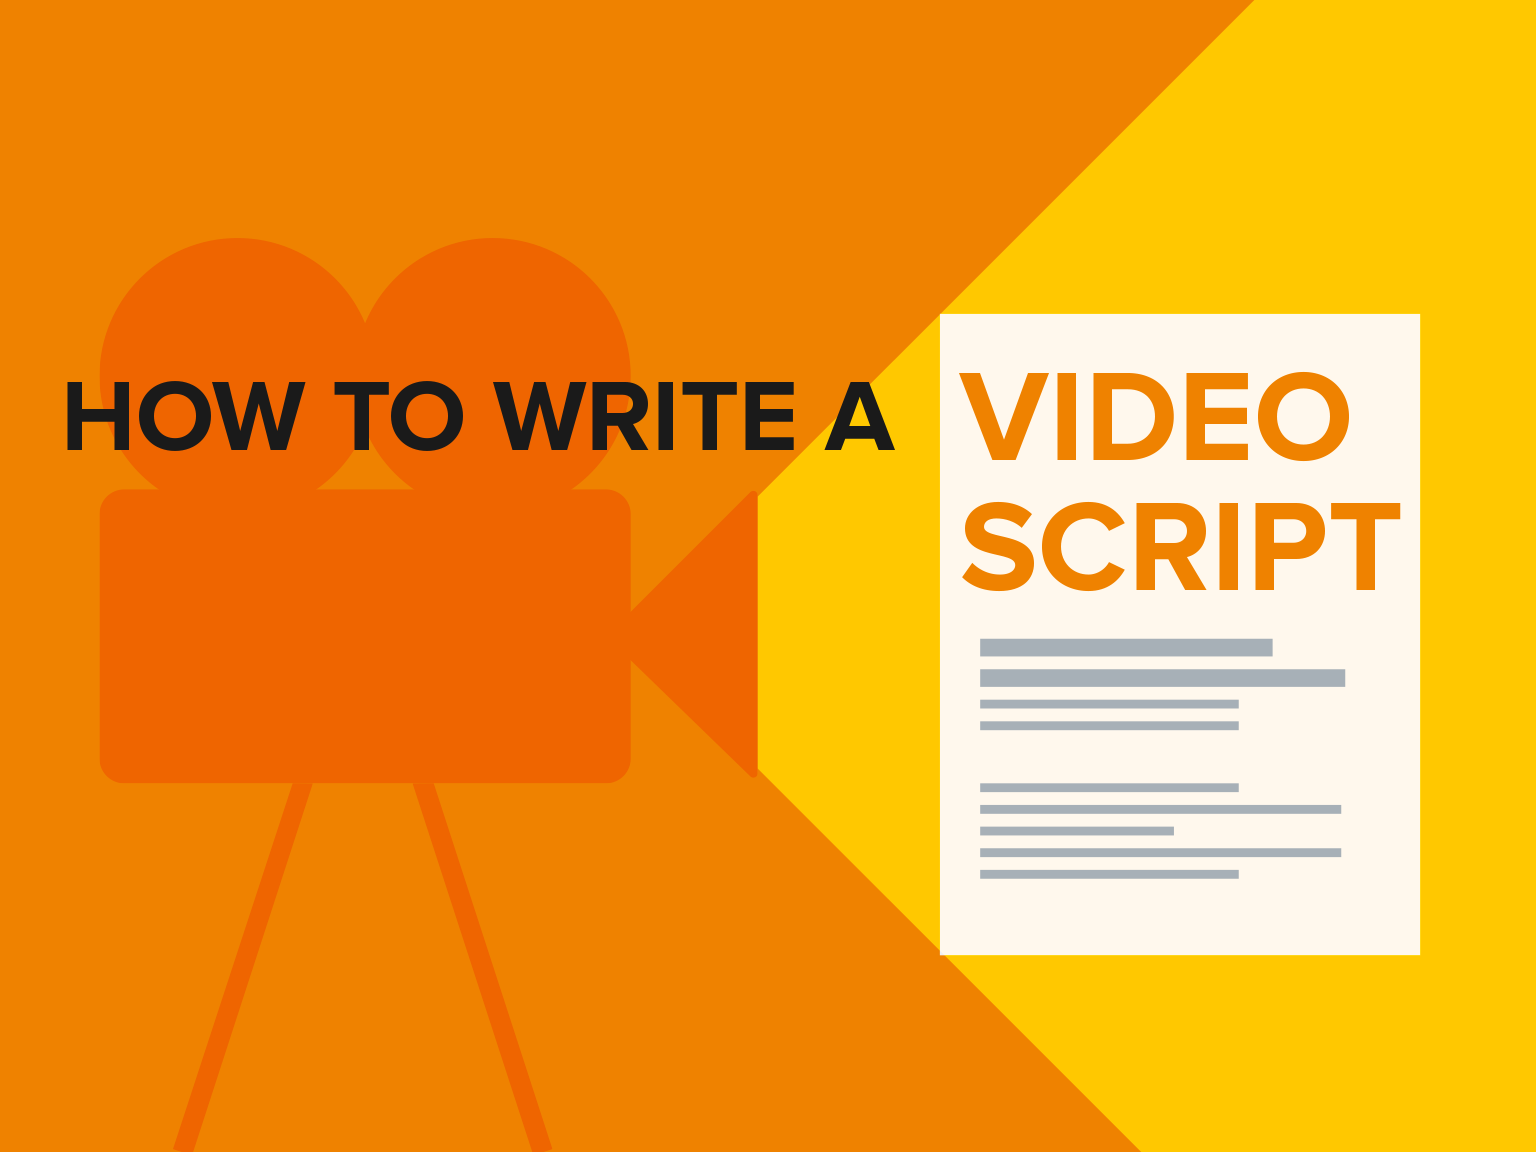 School Lovers Free Porn Videos - How to Write a Script for a Video (Free Template!) | The TechSmith Blog